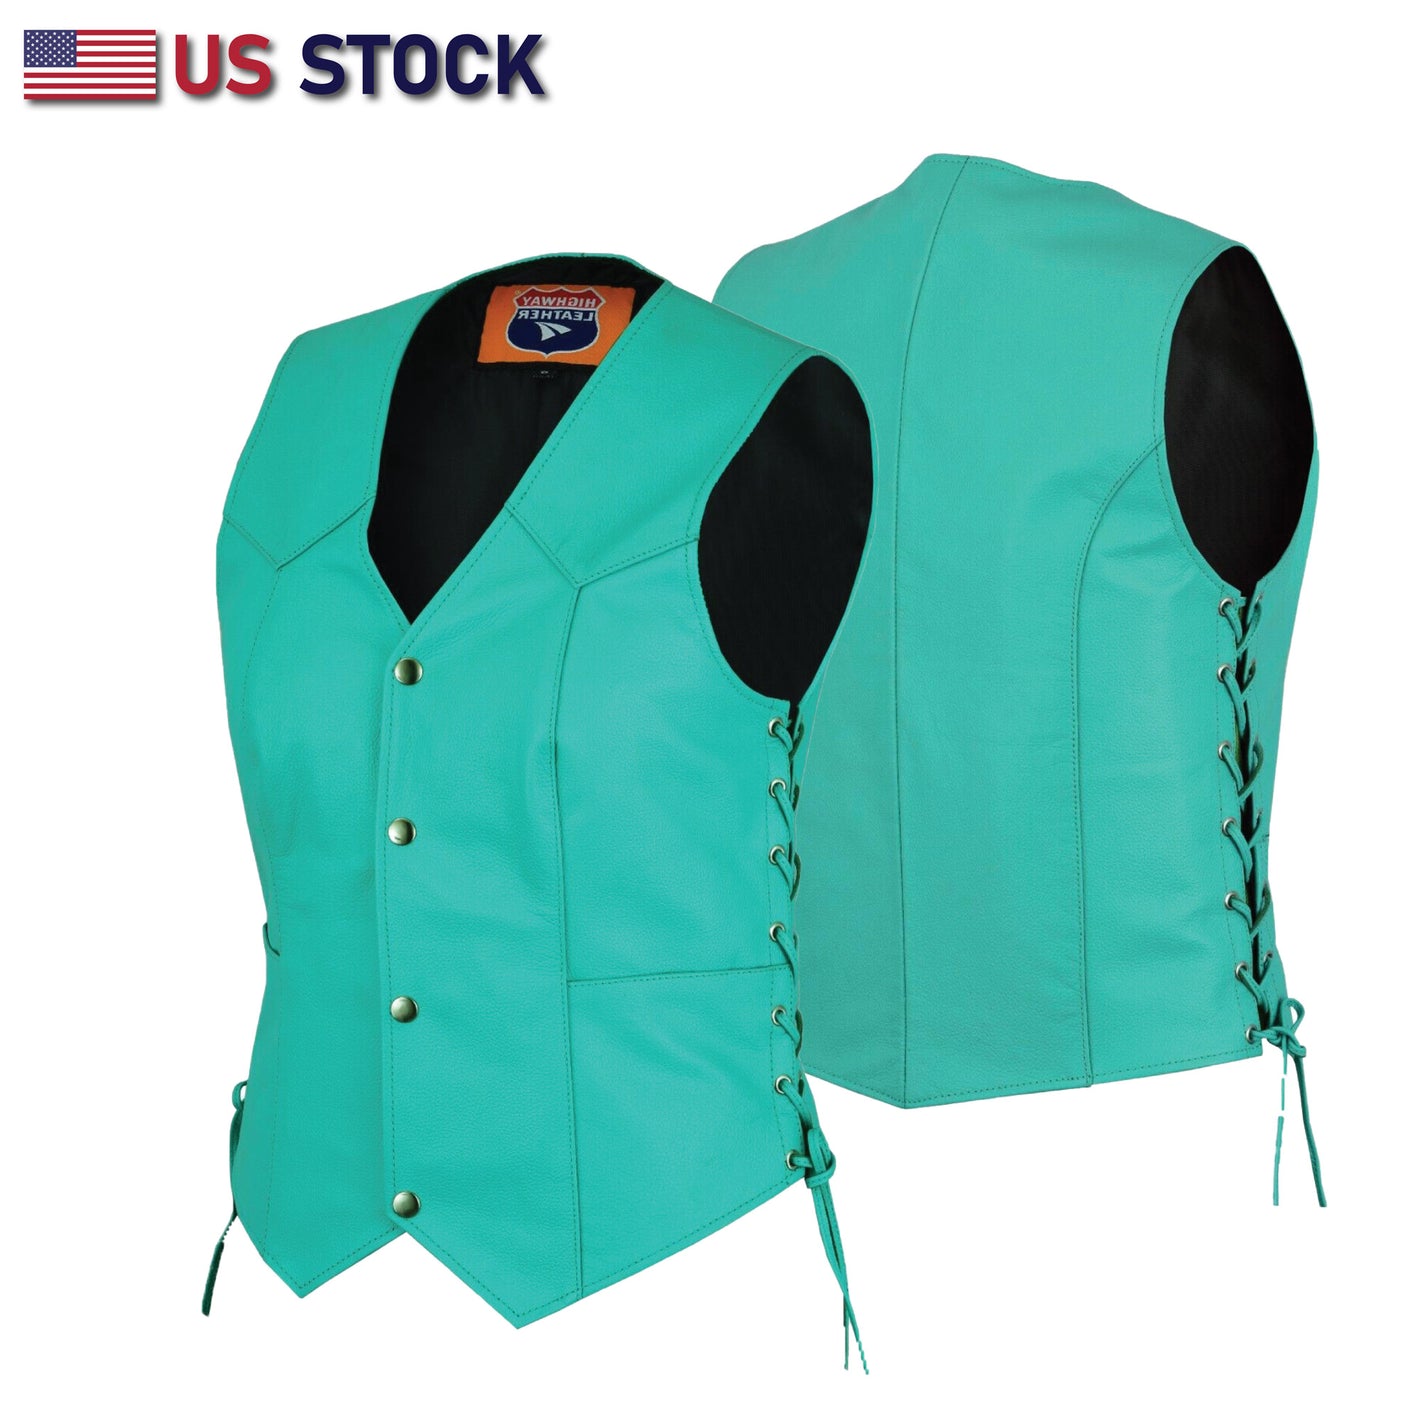 Women's Teal color side laced Leather Vest with Gun pockets for clubs